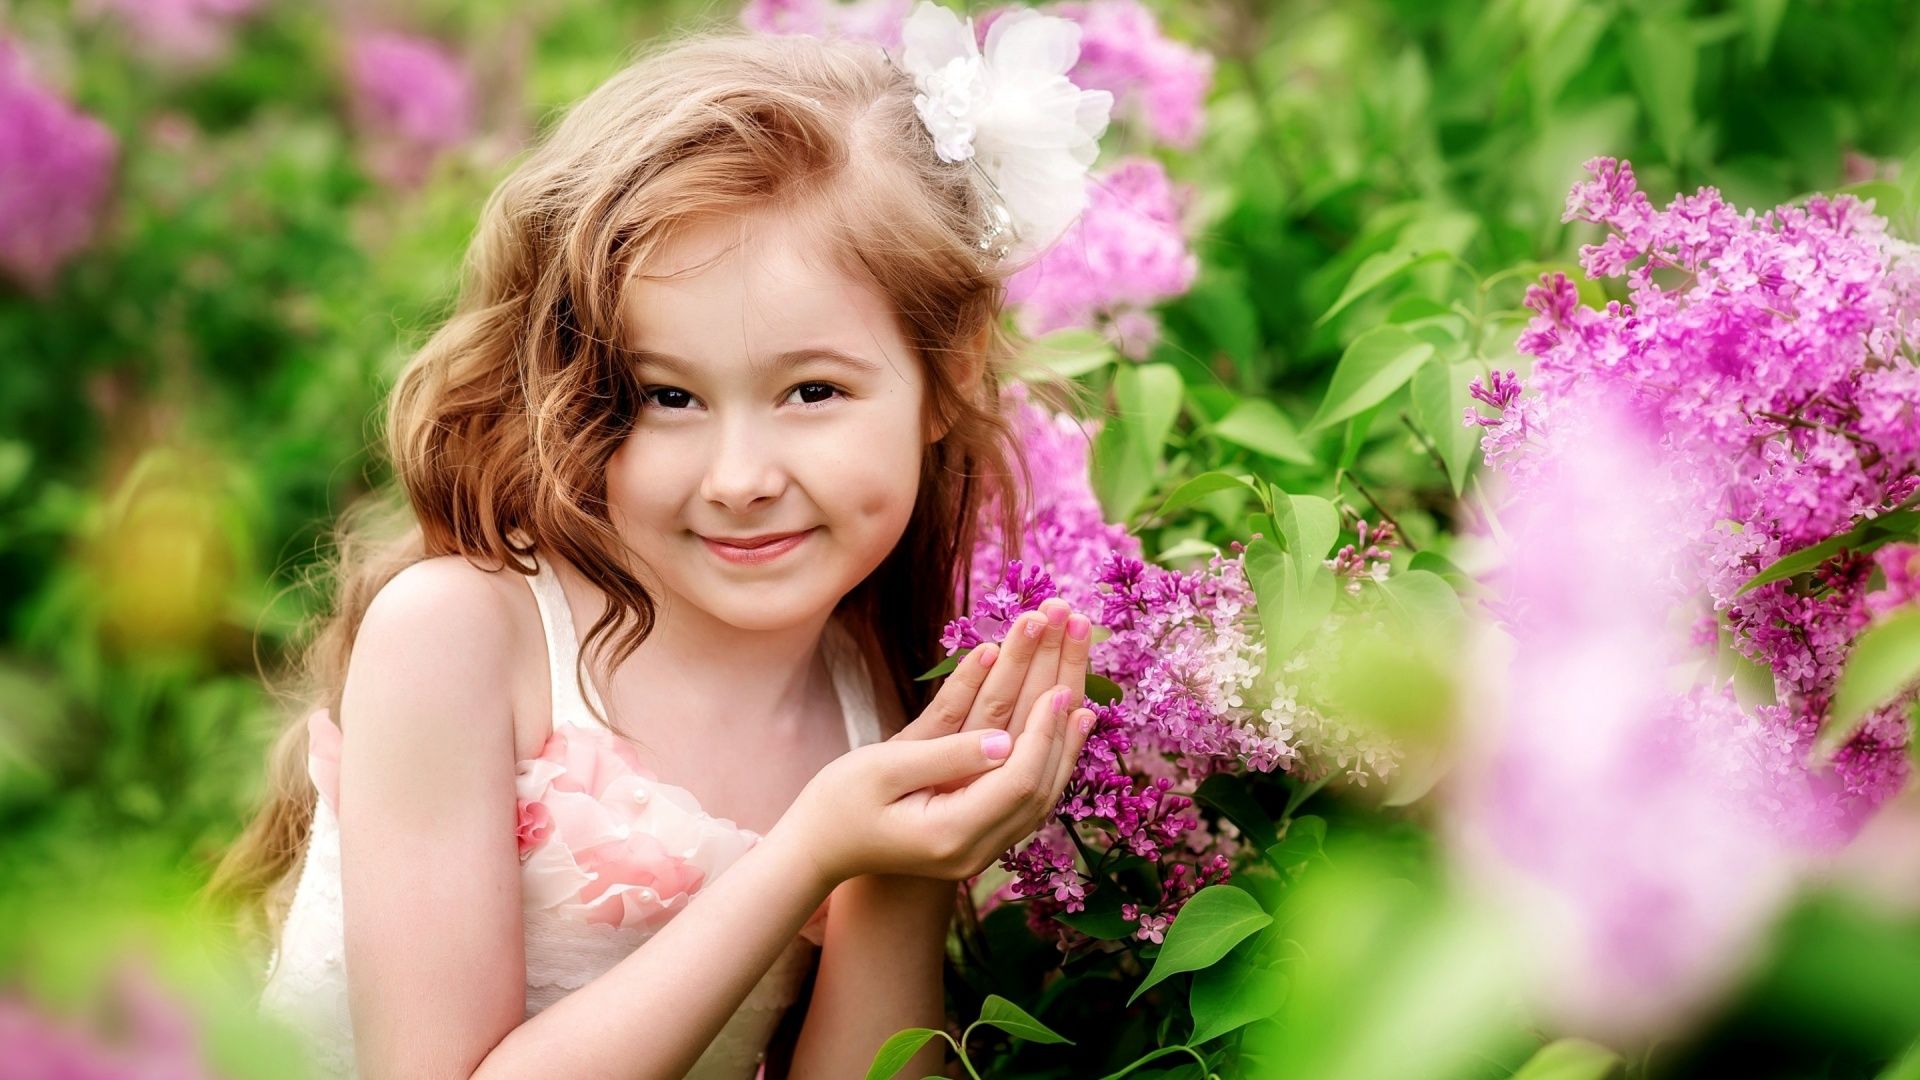 sweet girl wallpaper hd,people in nature,nature,child,pink,lilac